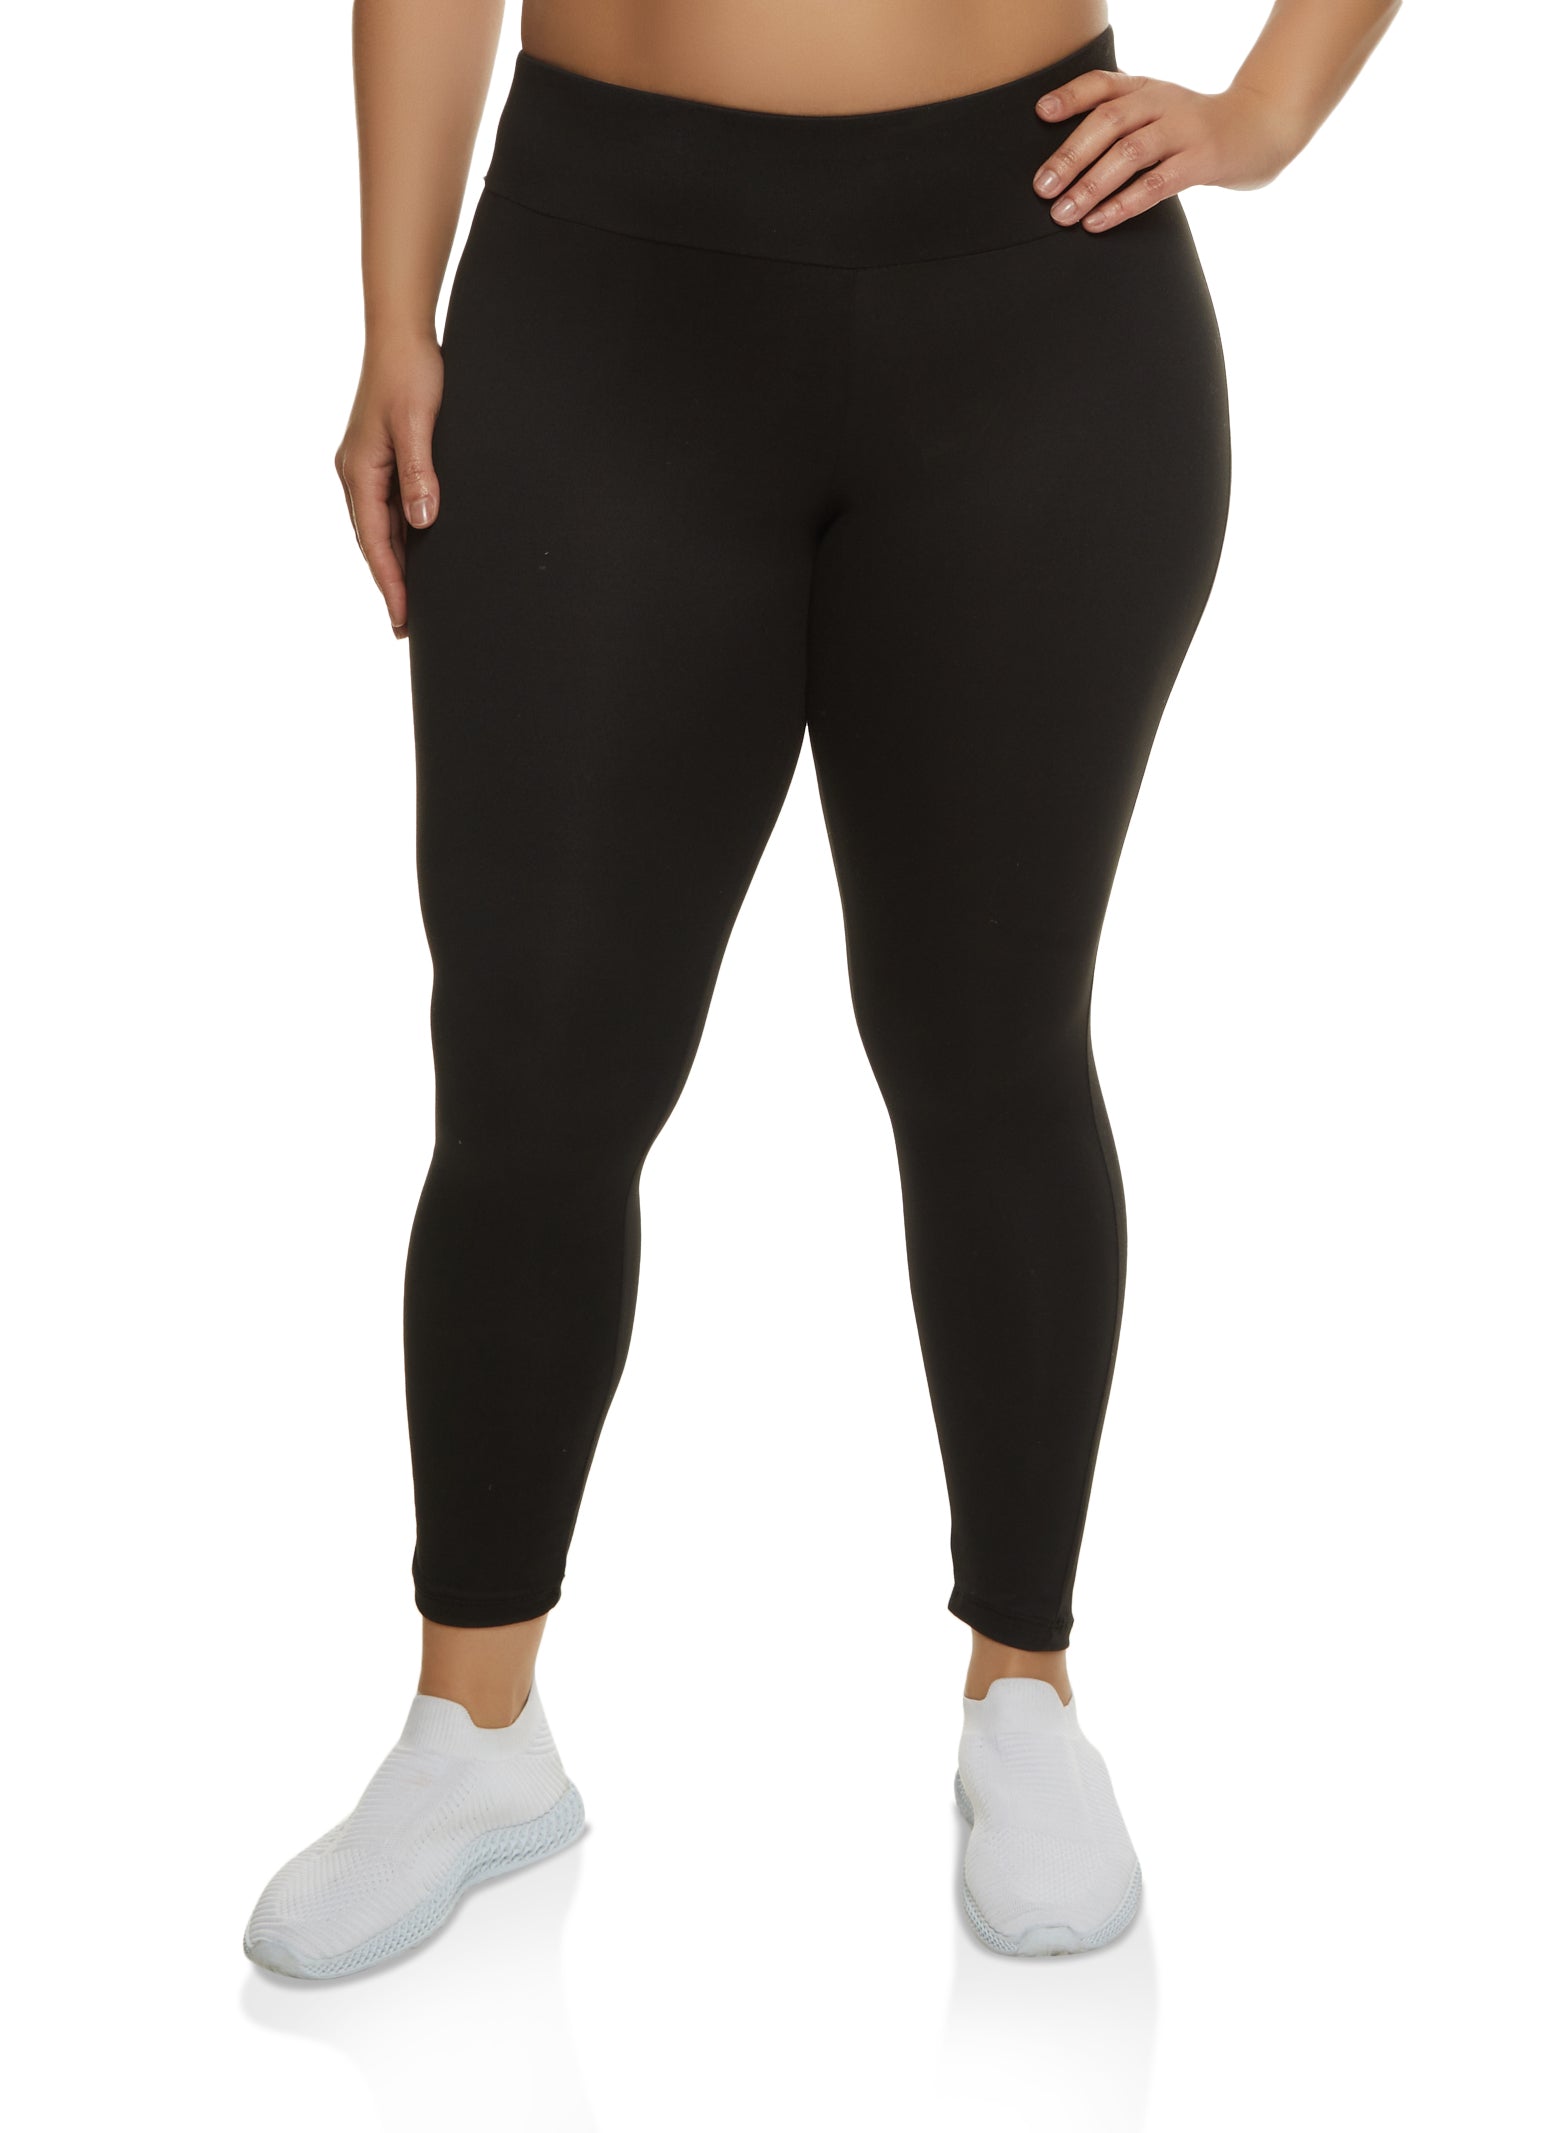 Plus Size Activewear and Loungewear, Everyday Low Prices